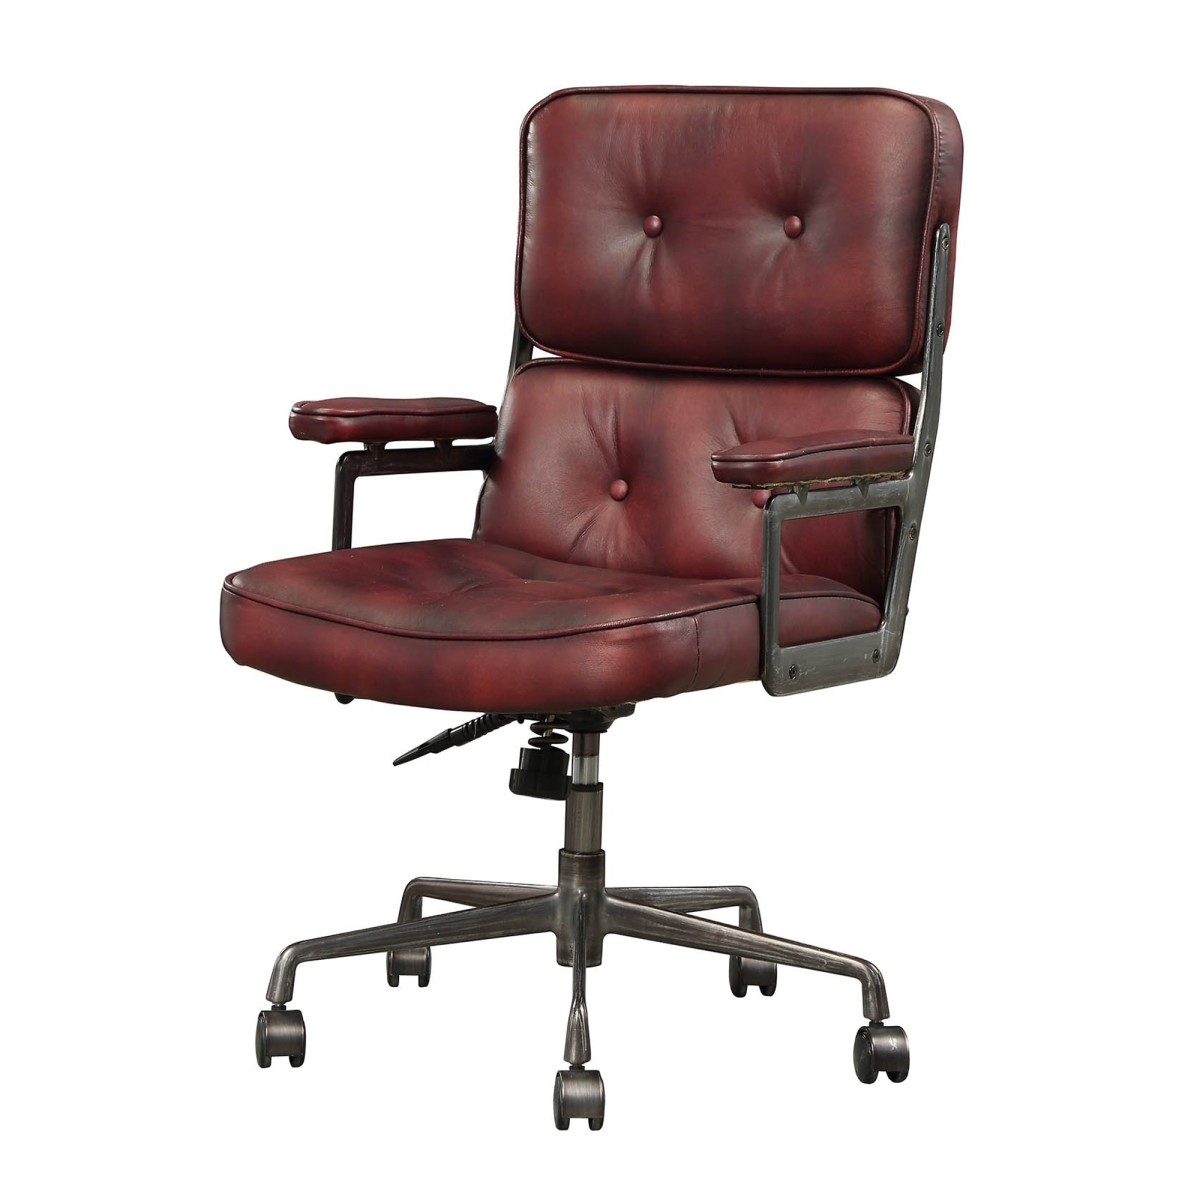 351890 Faux Leather Upholstered Metal Swivel Executive Chair With Armrest, Red & Gray